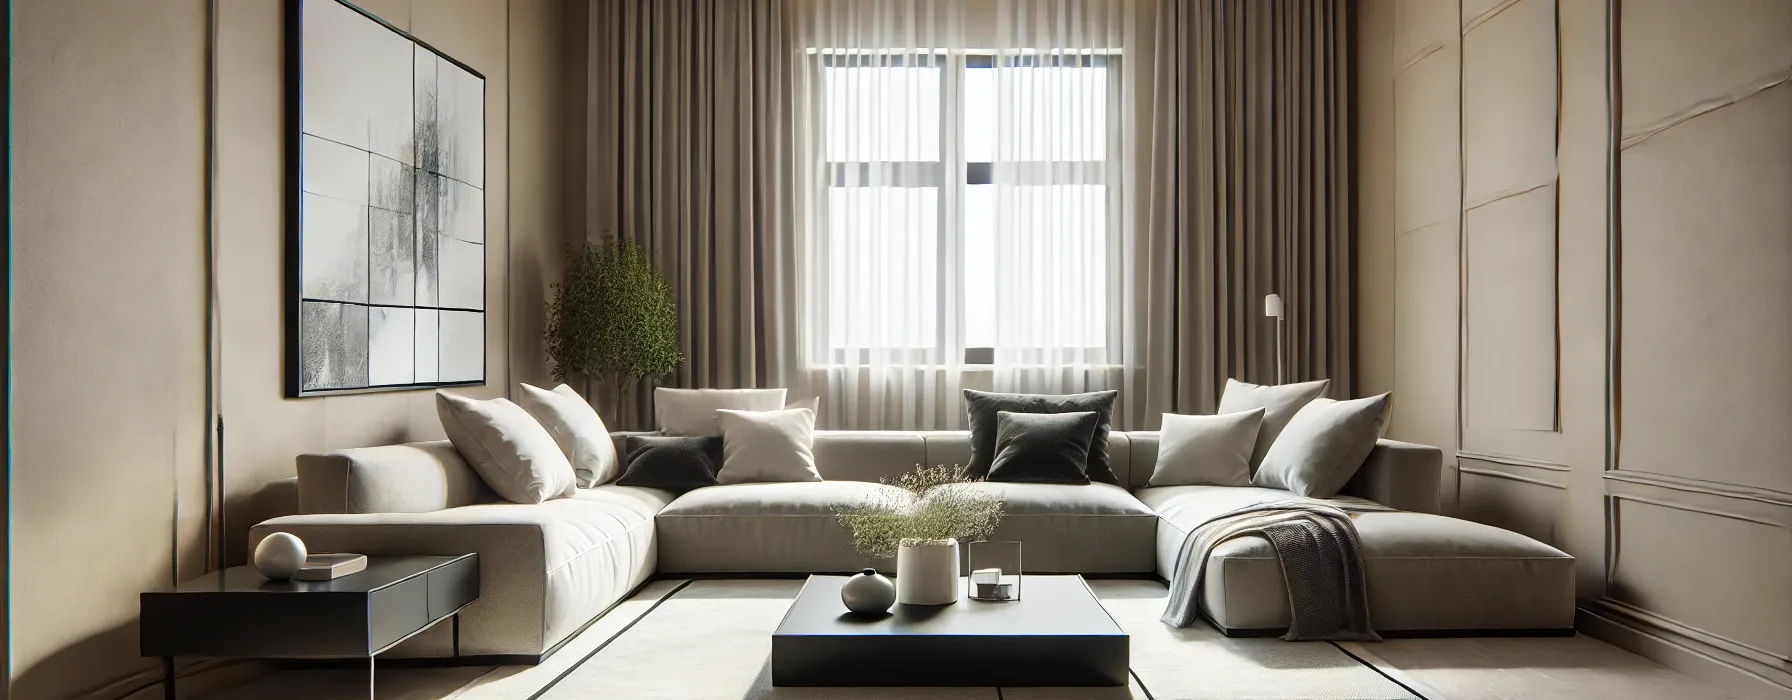 A photorealistic minimalist living room designed with neutral colors